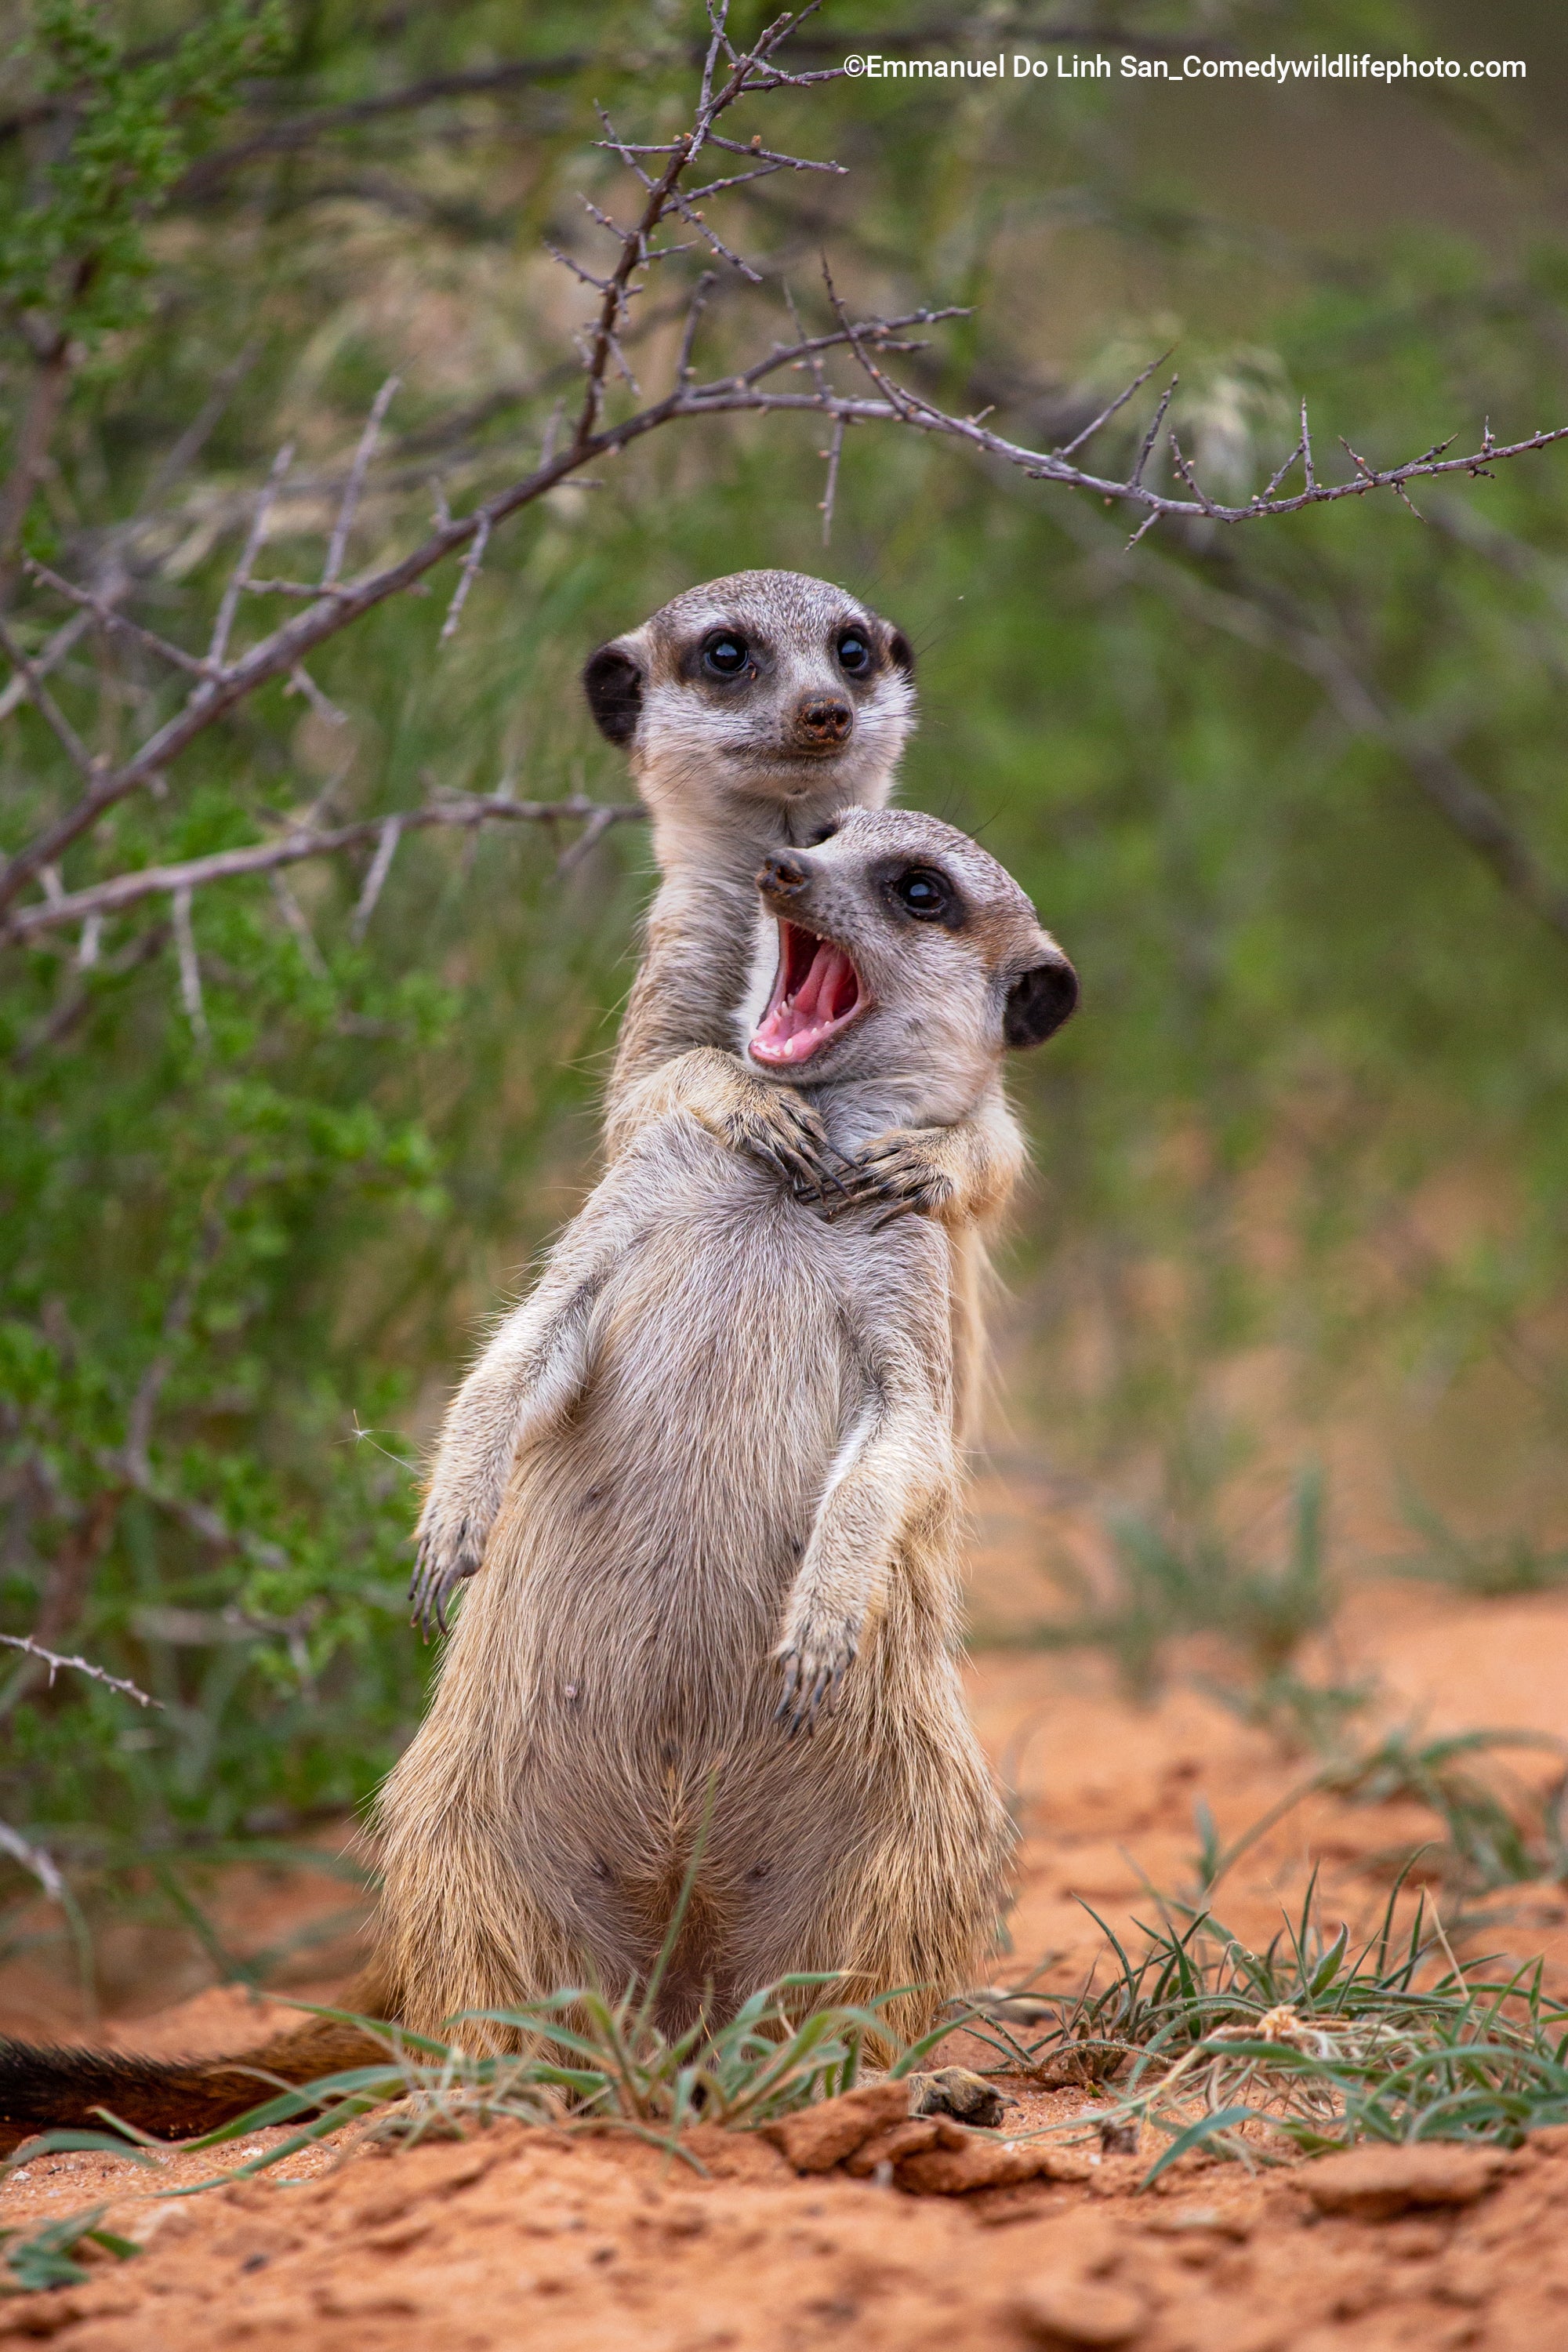 One meerkat appears to strangle another in cold blood. (Photo: © Emmanuel Do Linh San / Comedywildlifephoto.com.)